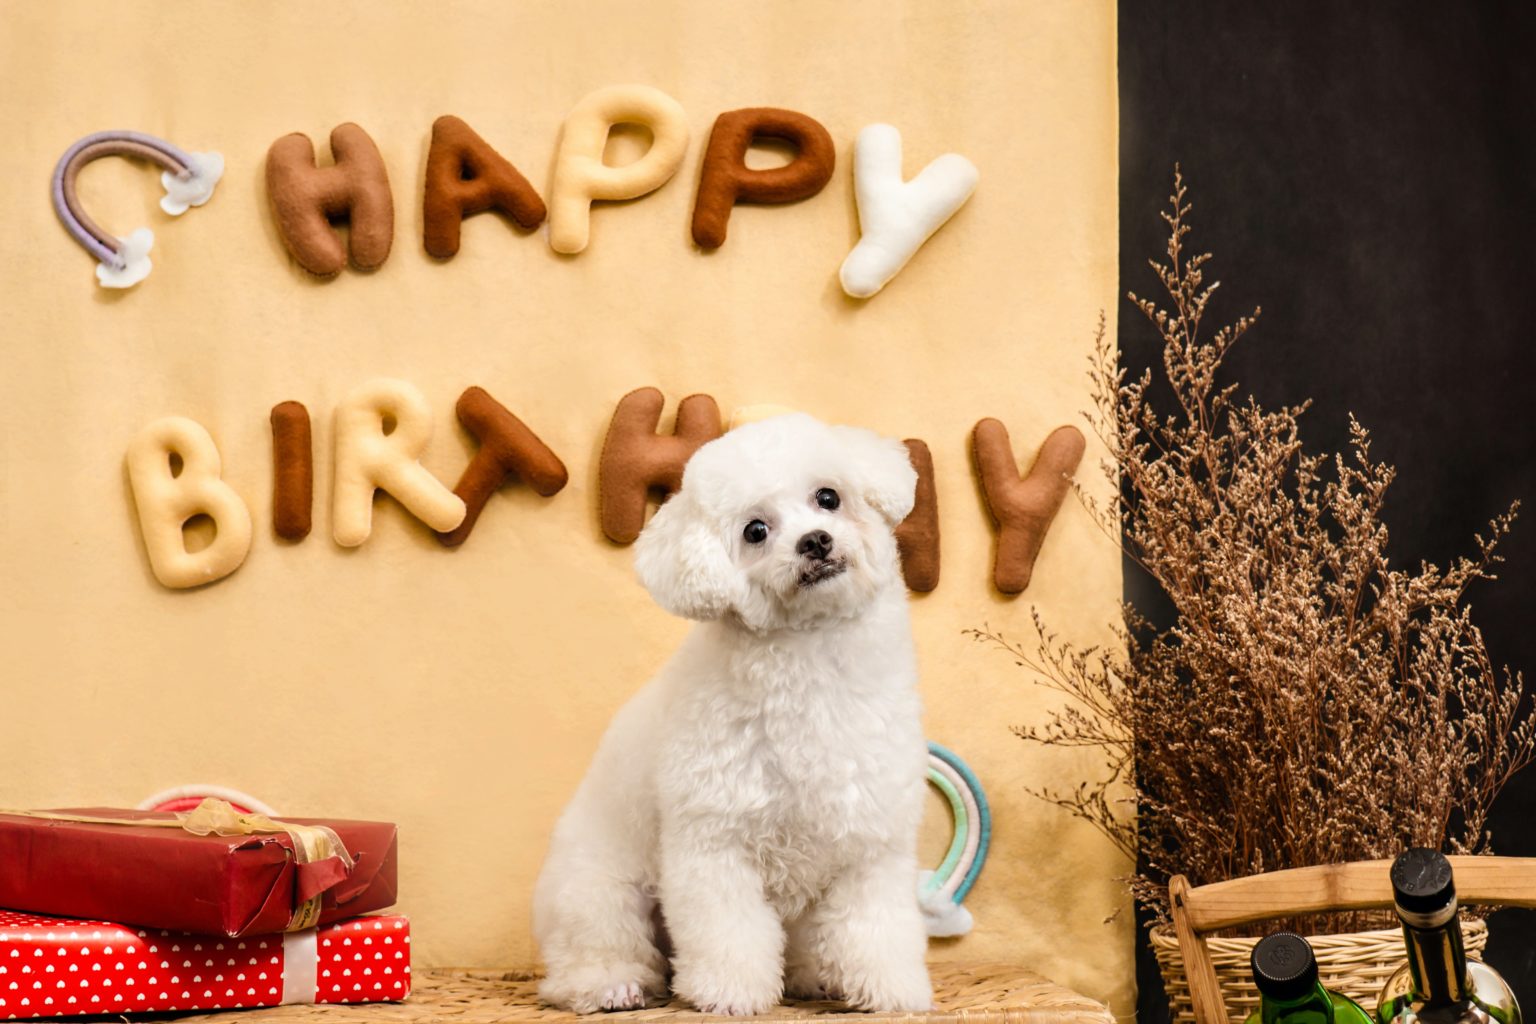 Descended from Bichons, the Bolognese dog originated in Bologna, Italy in the 11th century. The breed was loved by nobility and was a frequent gift between noble families during the Renaissance (particularly between Italian and Belgian royalty). When nobility started to die out, the breed almost went extinct.